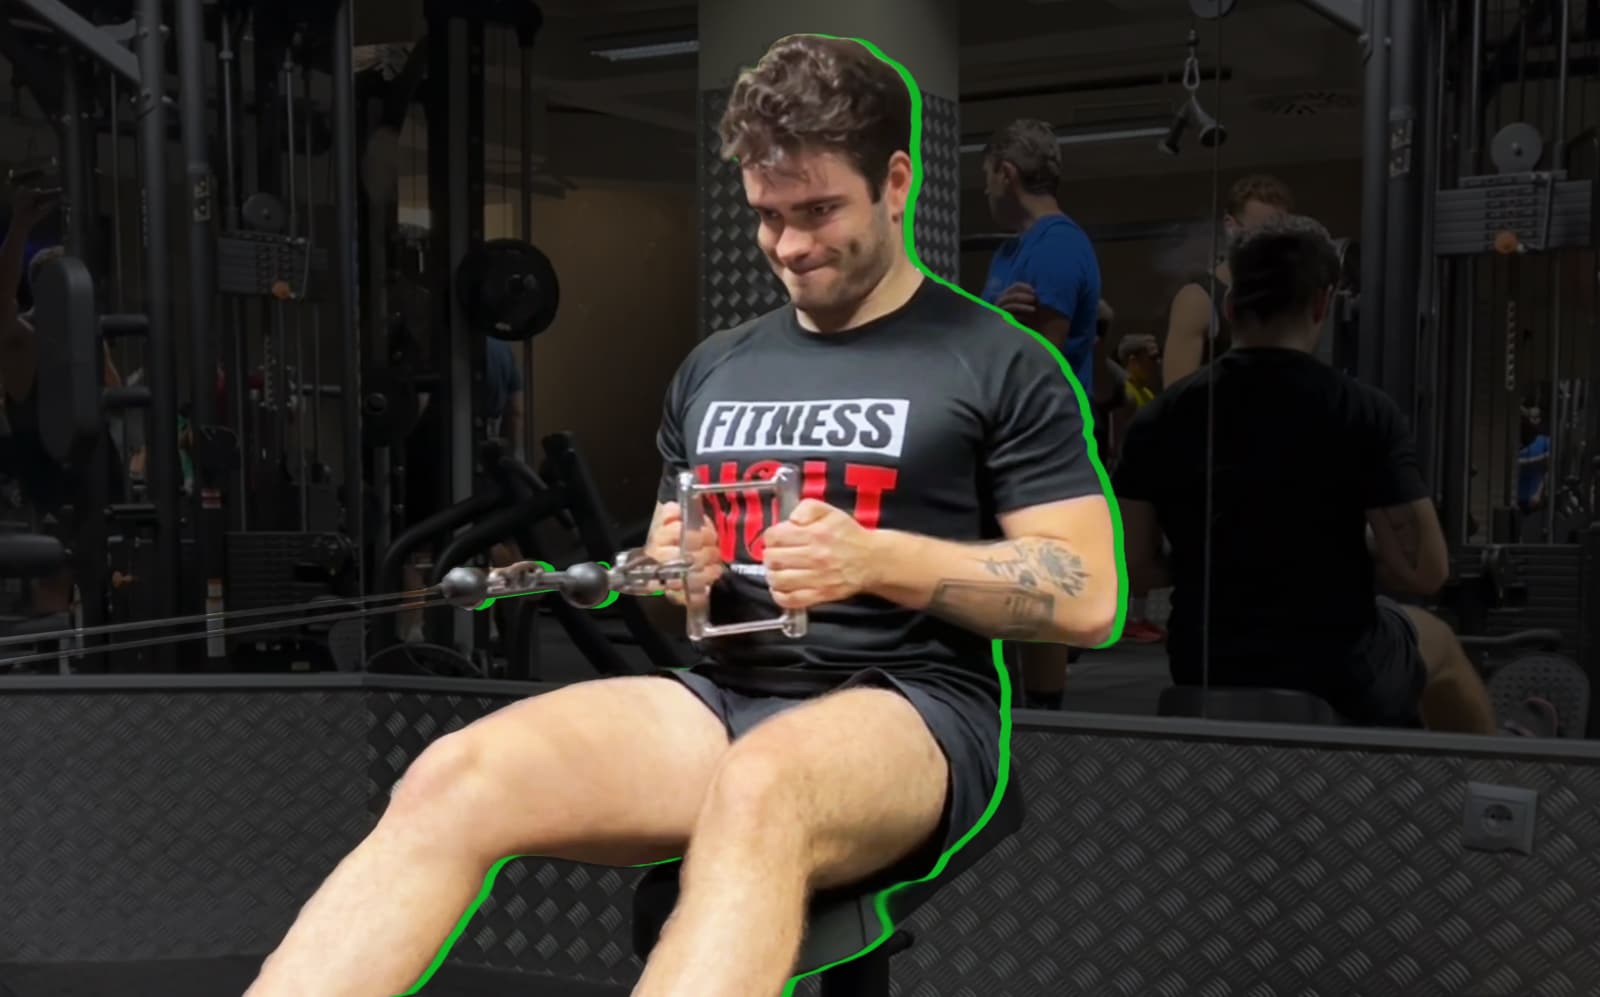 Band Seated Row Exercise Guide: Muscles Worked, How-To, Benefits